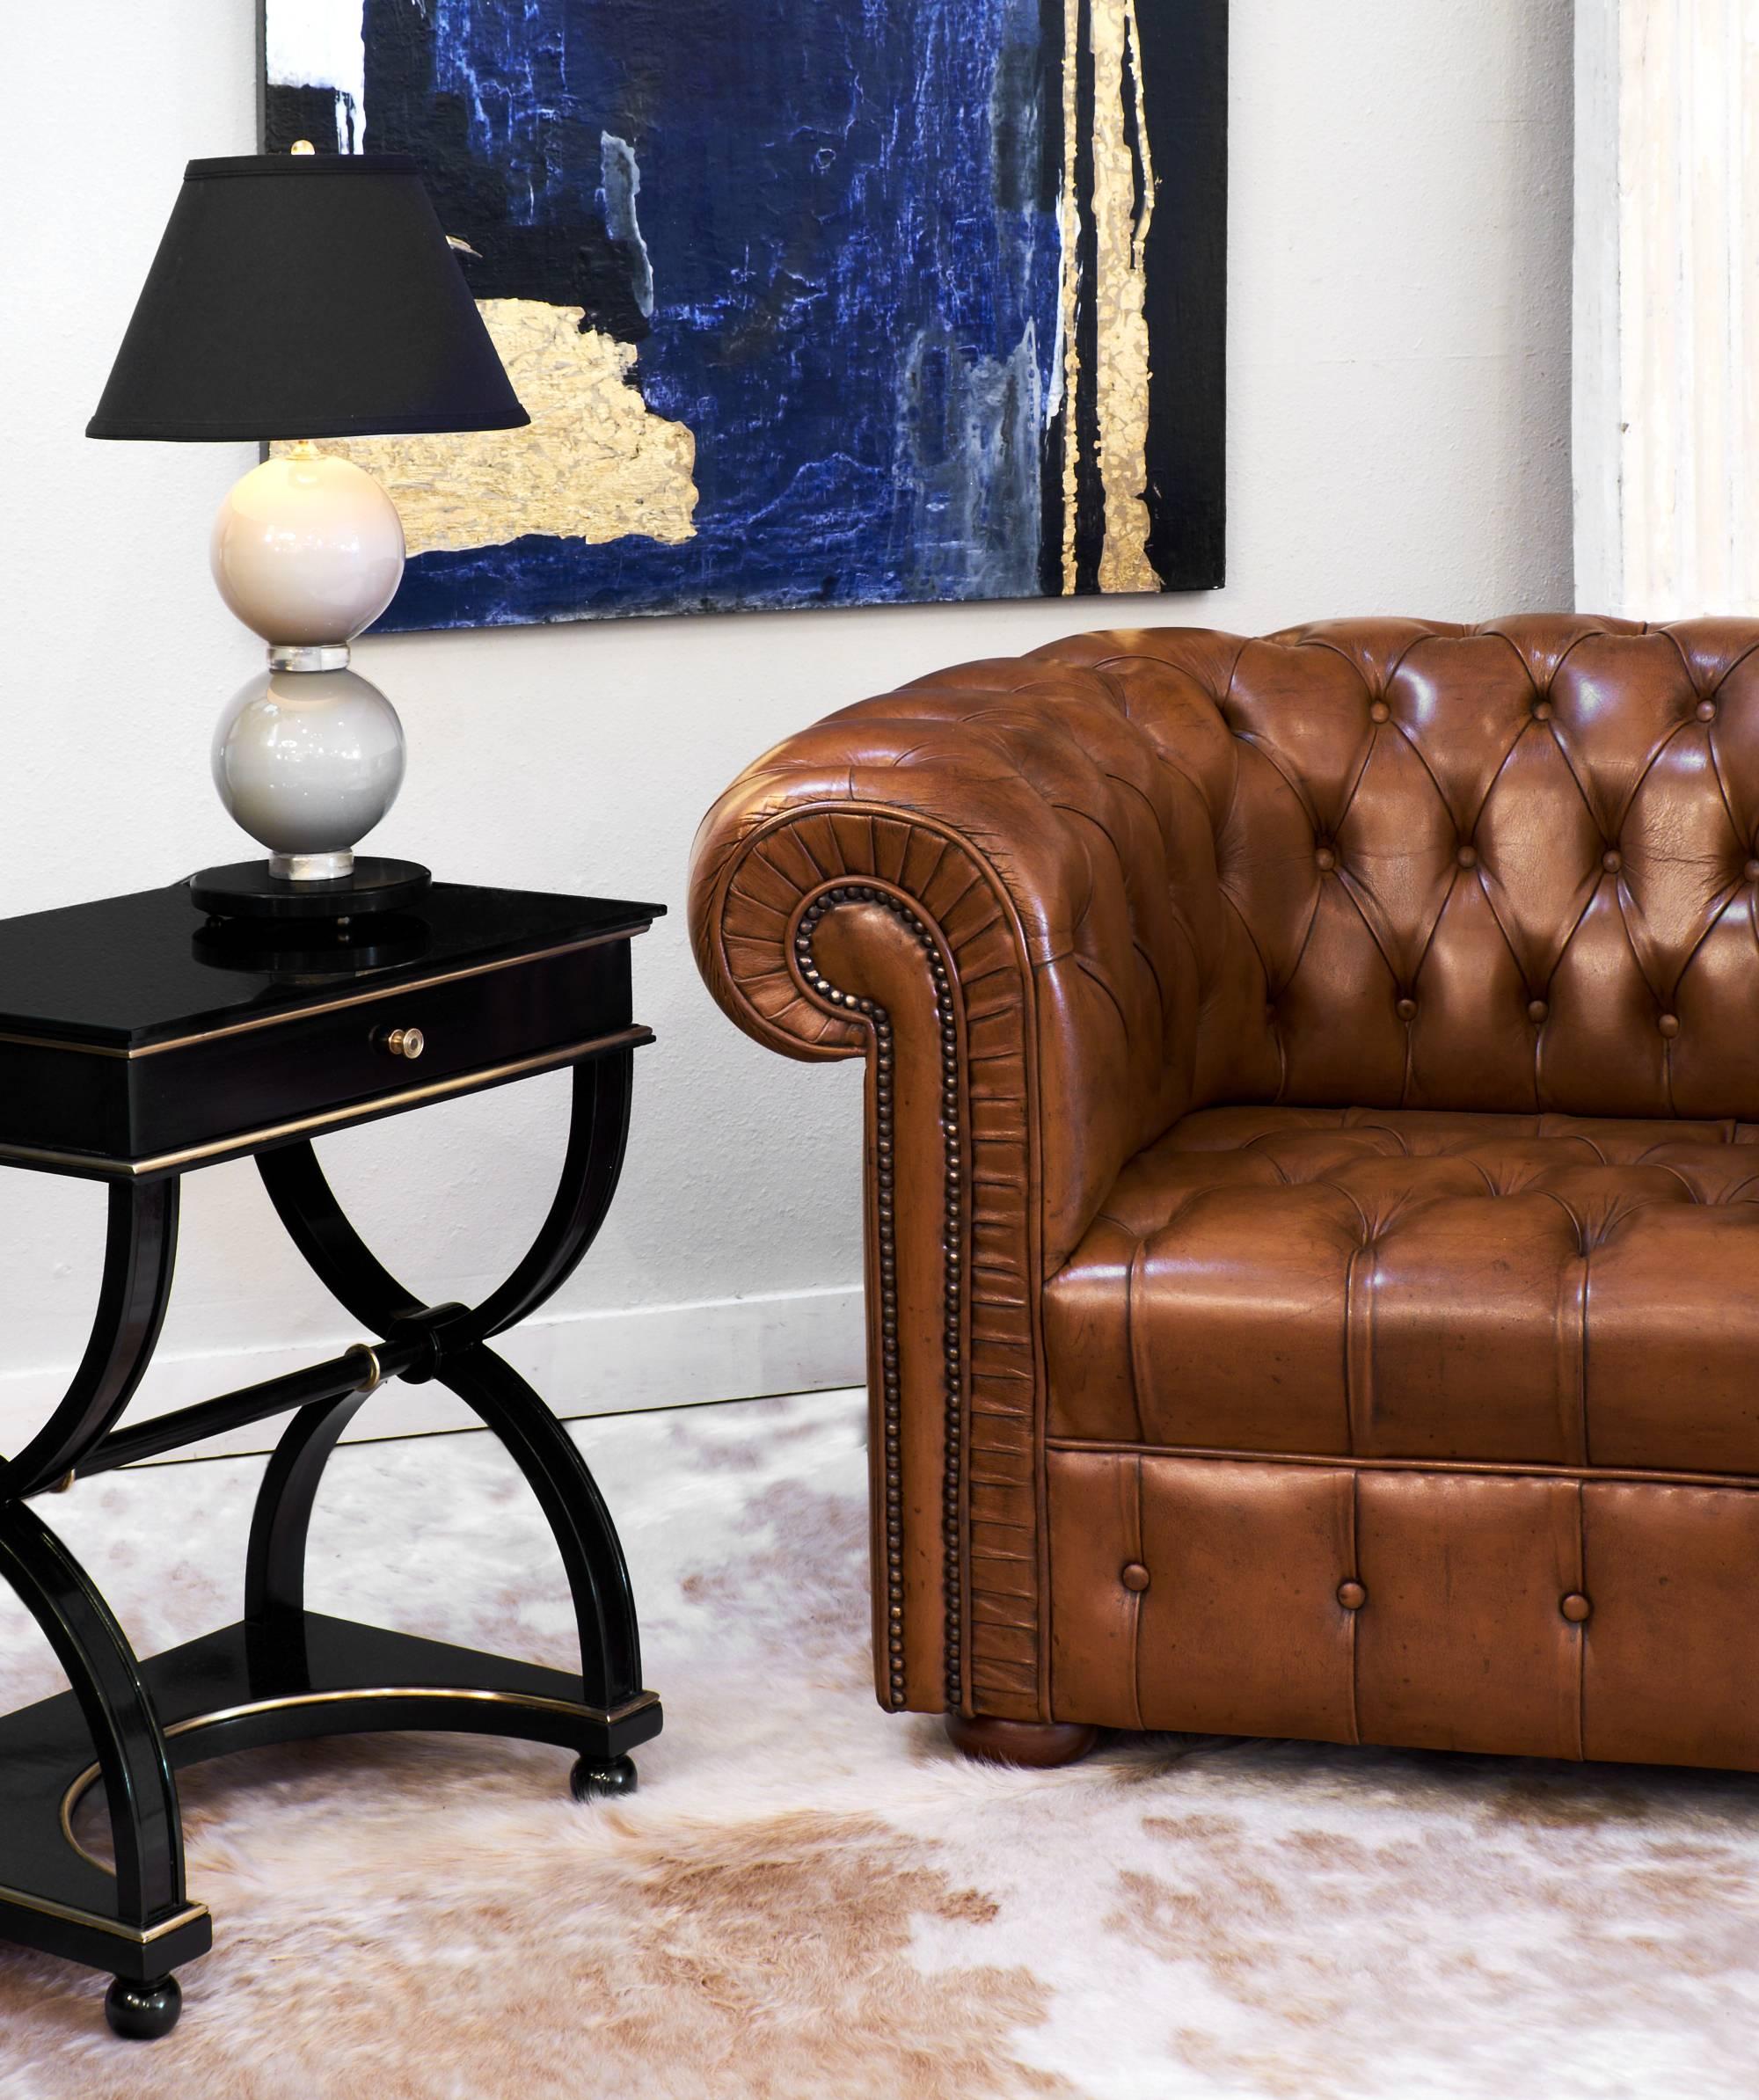 Chesterfield club chairs with tufted cognac leather upholstery and cherrywood bun feet. The rich color and rolled arms make these chairs Classic in style and so comfortable.